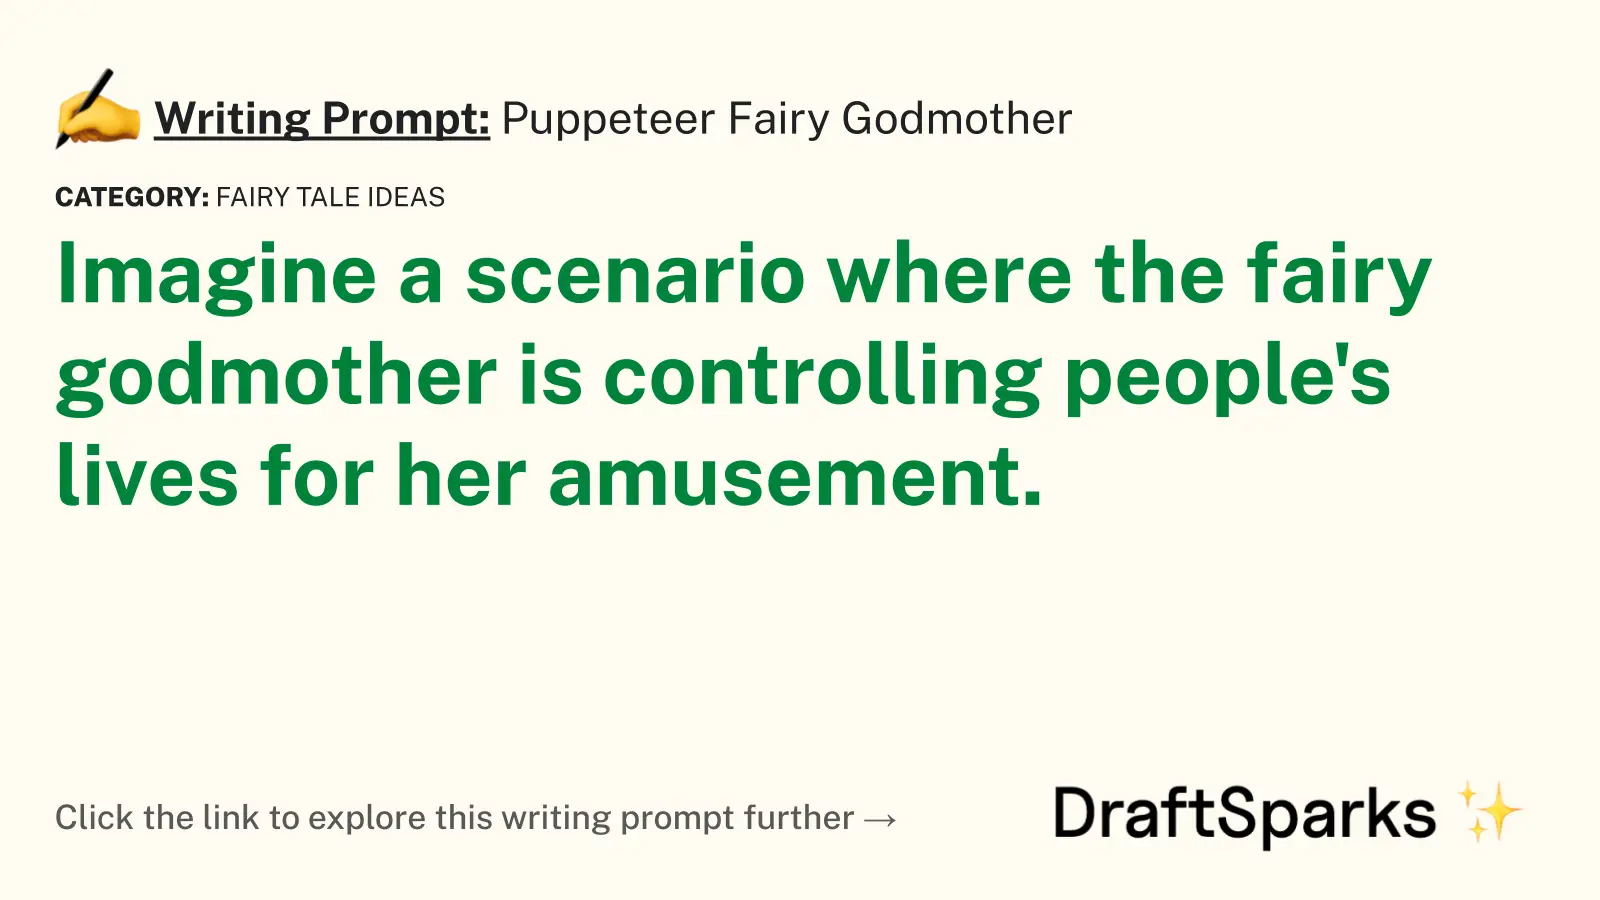 Puppeteer Fairy Godmother